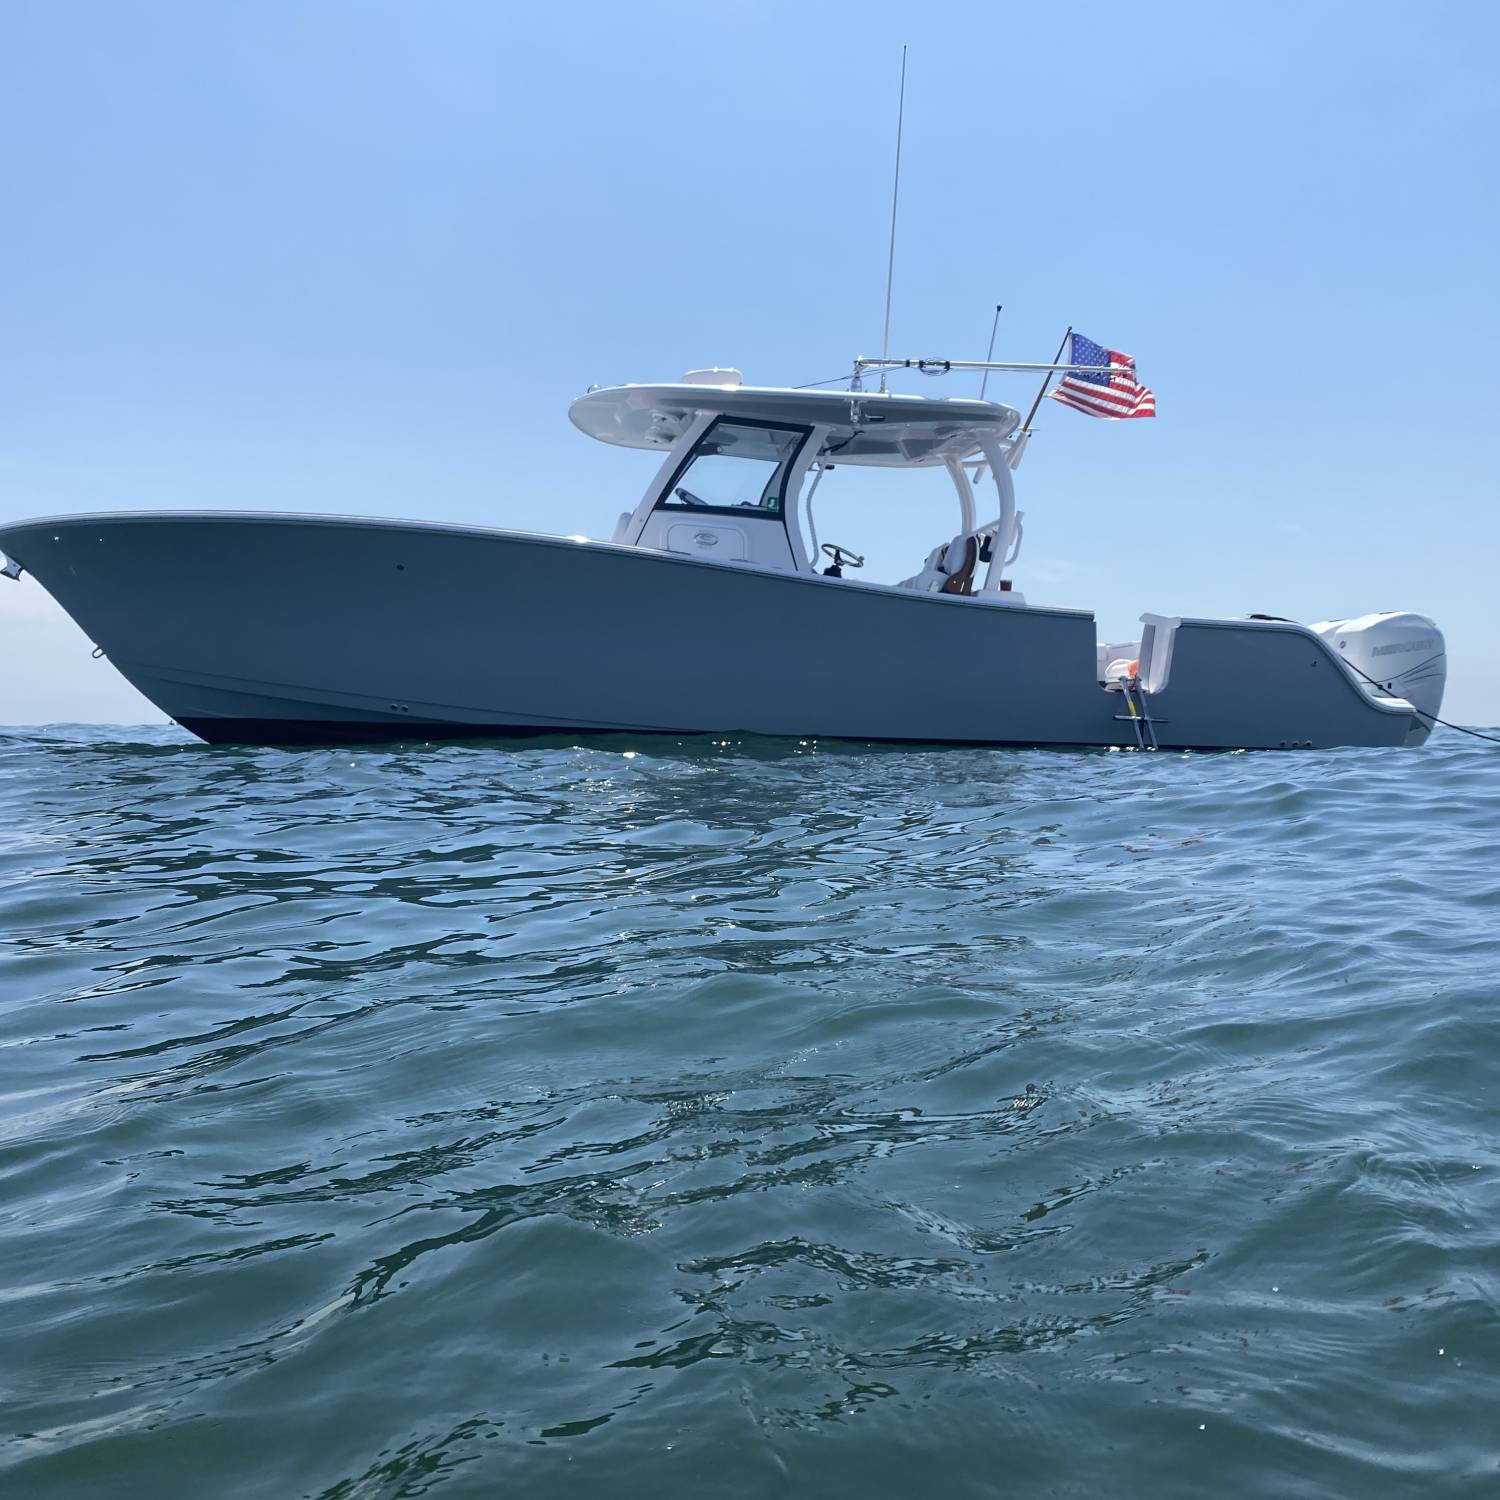 Title: Sitting pretty - On board their Sportsman Open 322 Center Console - Location: New Jersey USA. Participating in the Photo Contest #SportsmanOctober2023